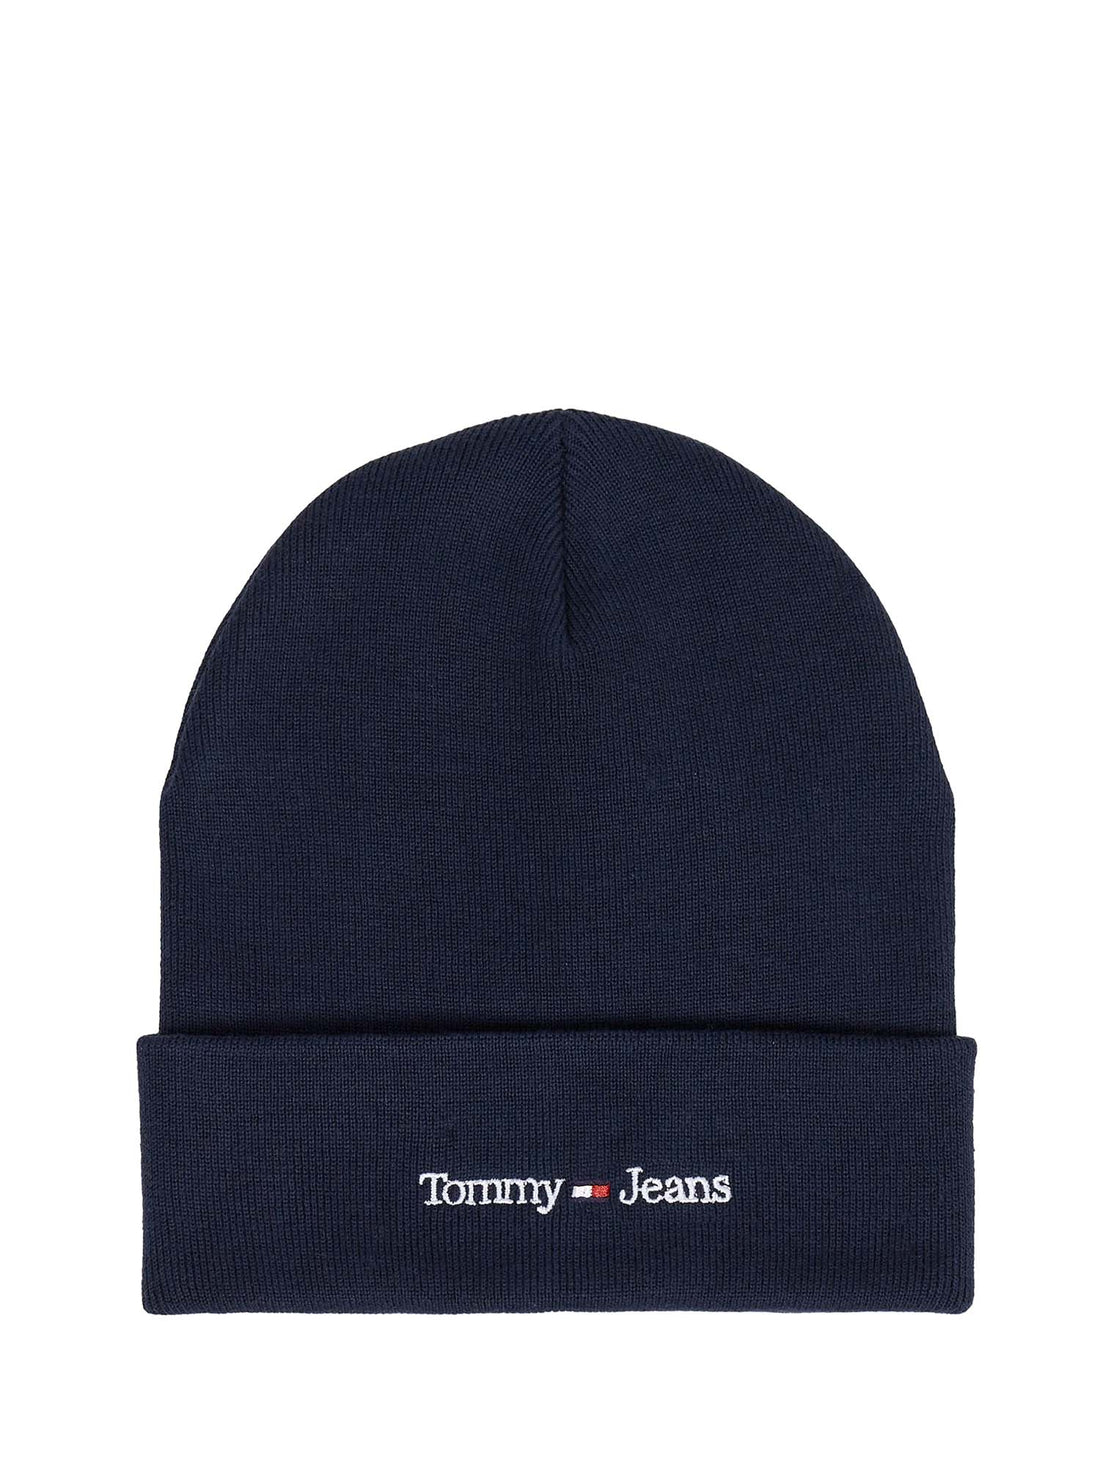 Cappelli Blu Tommy Jeans